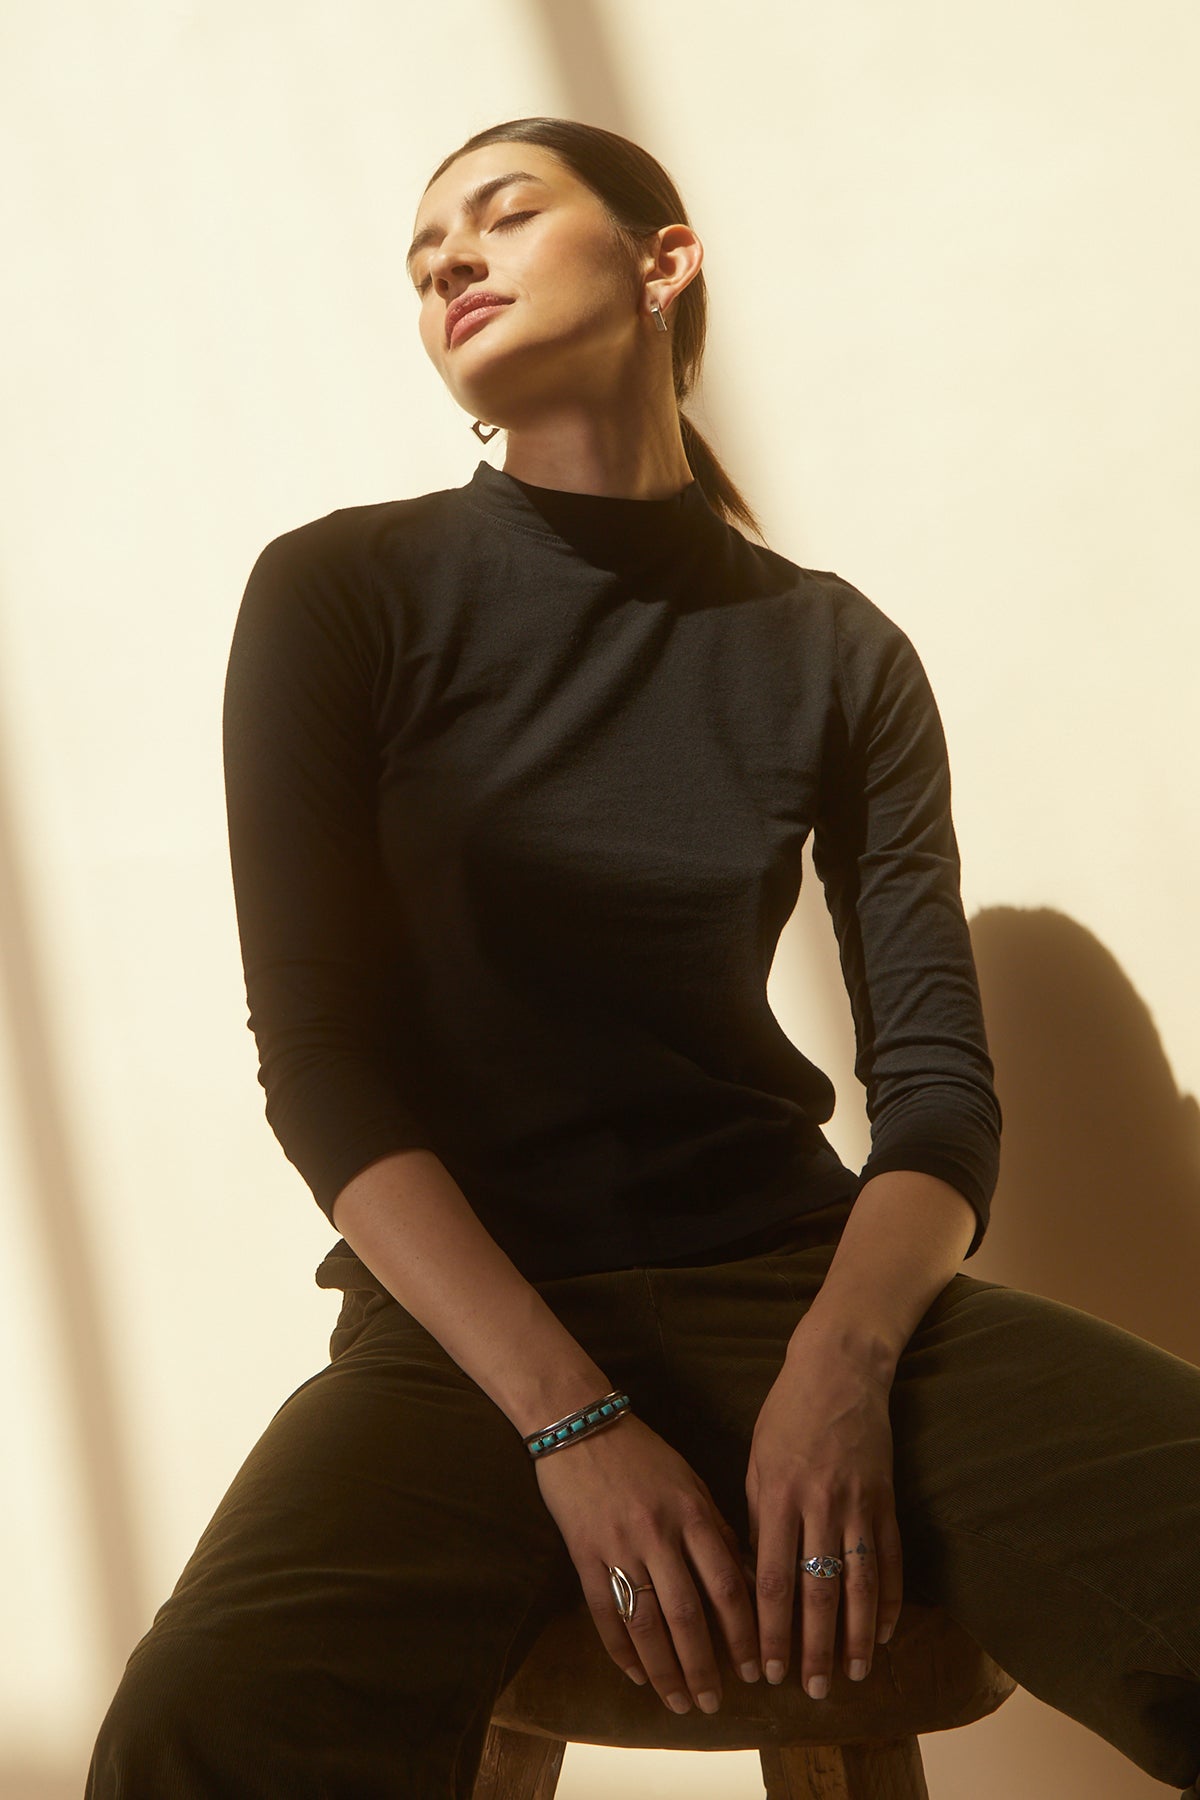   A woman sitting on a stool in a QUINNY 3/4 SLEEVE MOCK NECK TEE by Velvet by Graham & Spencer, a perfect layering piece made of soft cotton knit. 